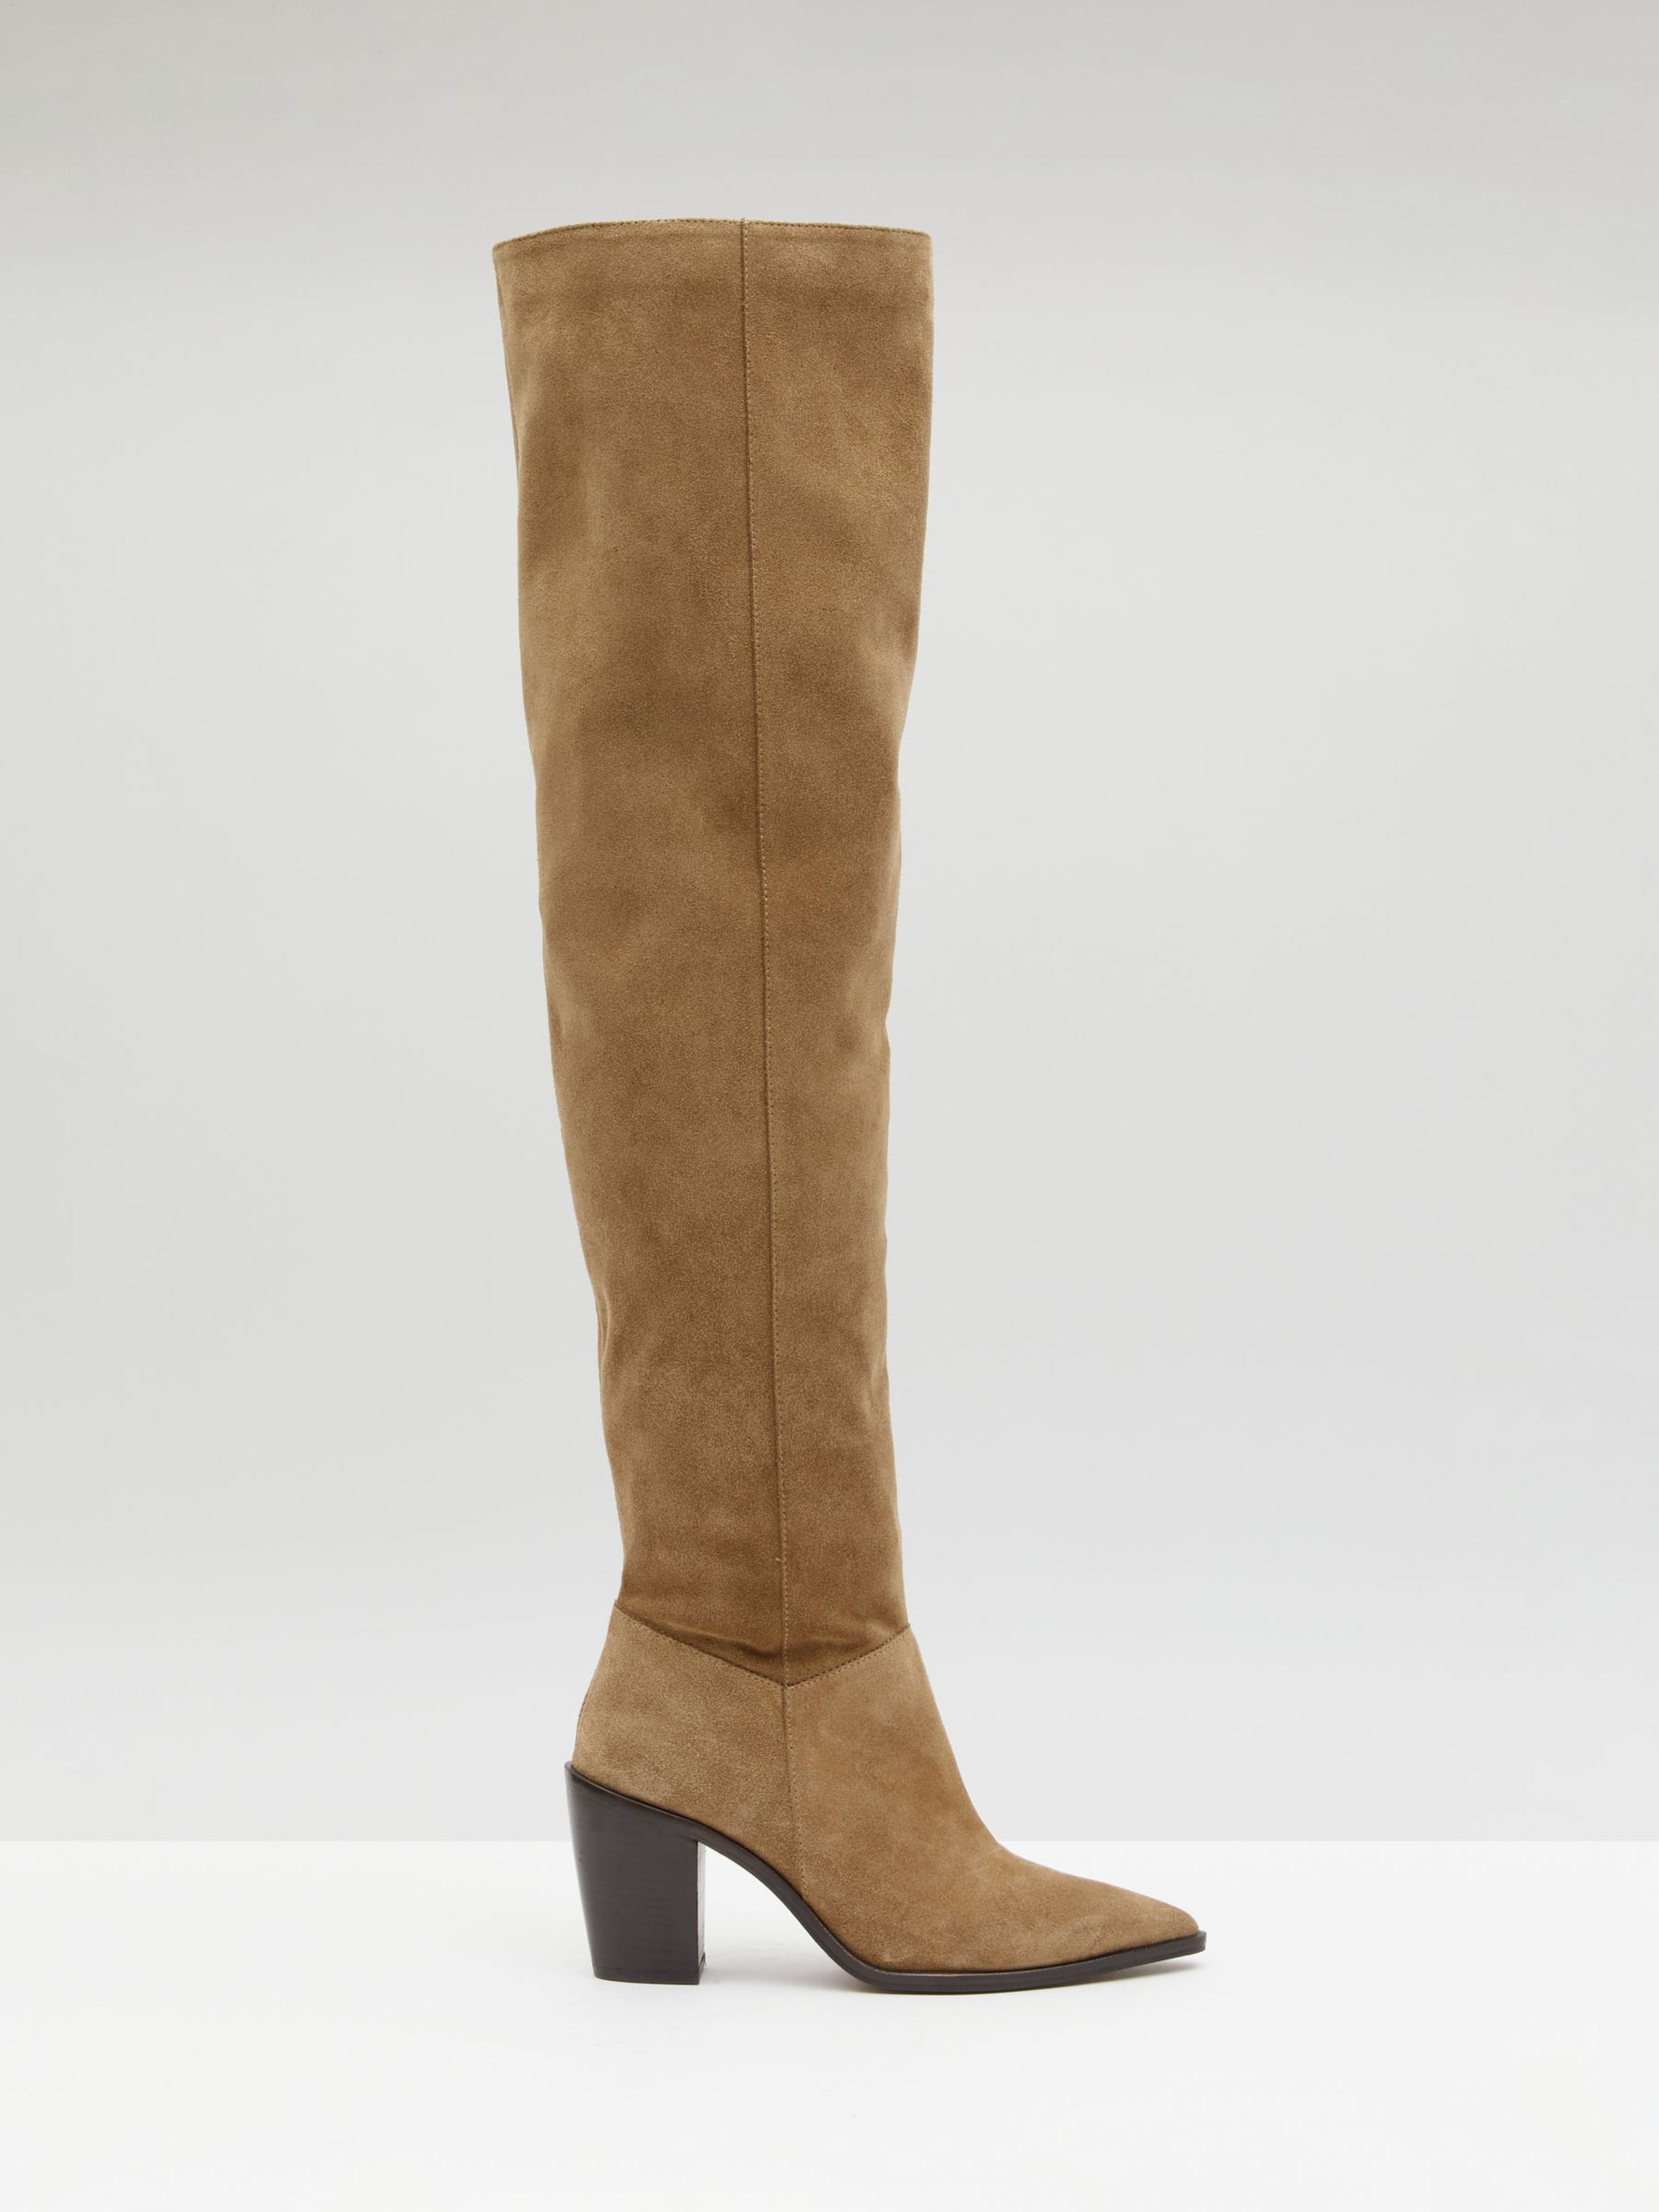 HUSH Elise Leather Over The Knee Boots, Tan at John Lewis & Partners